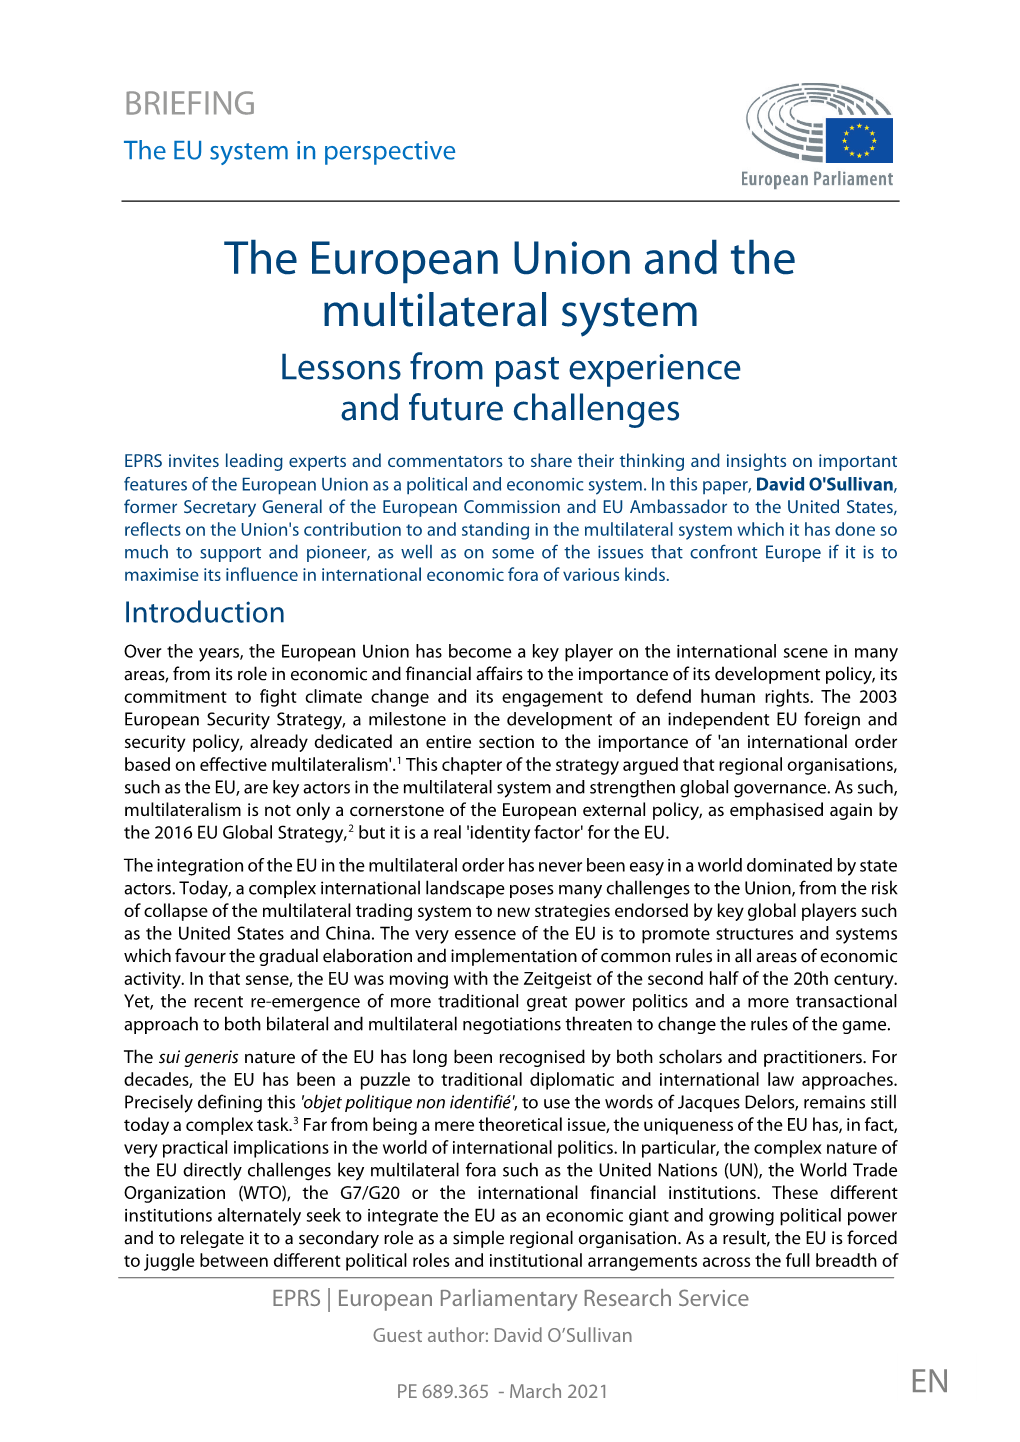 The European Union and the Multilateral System Lessons from Past Experience and Future Challenges